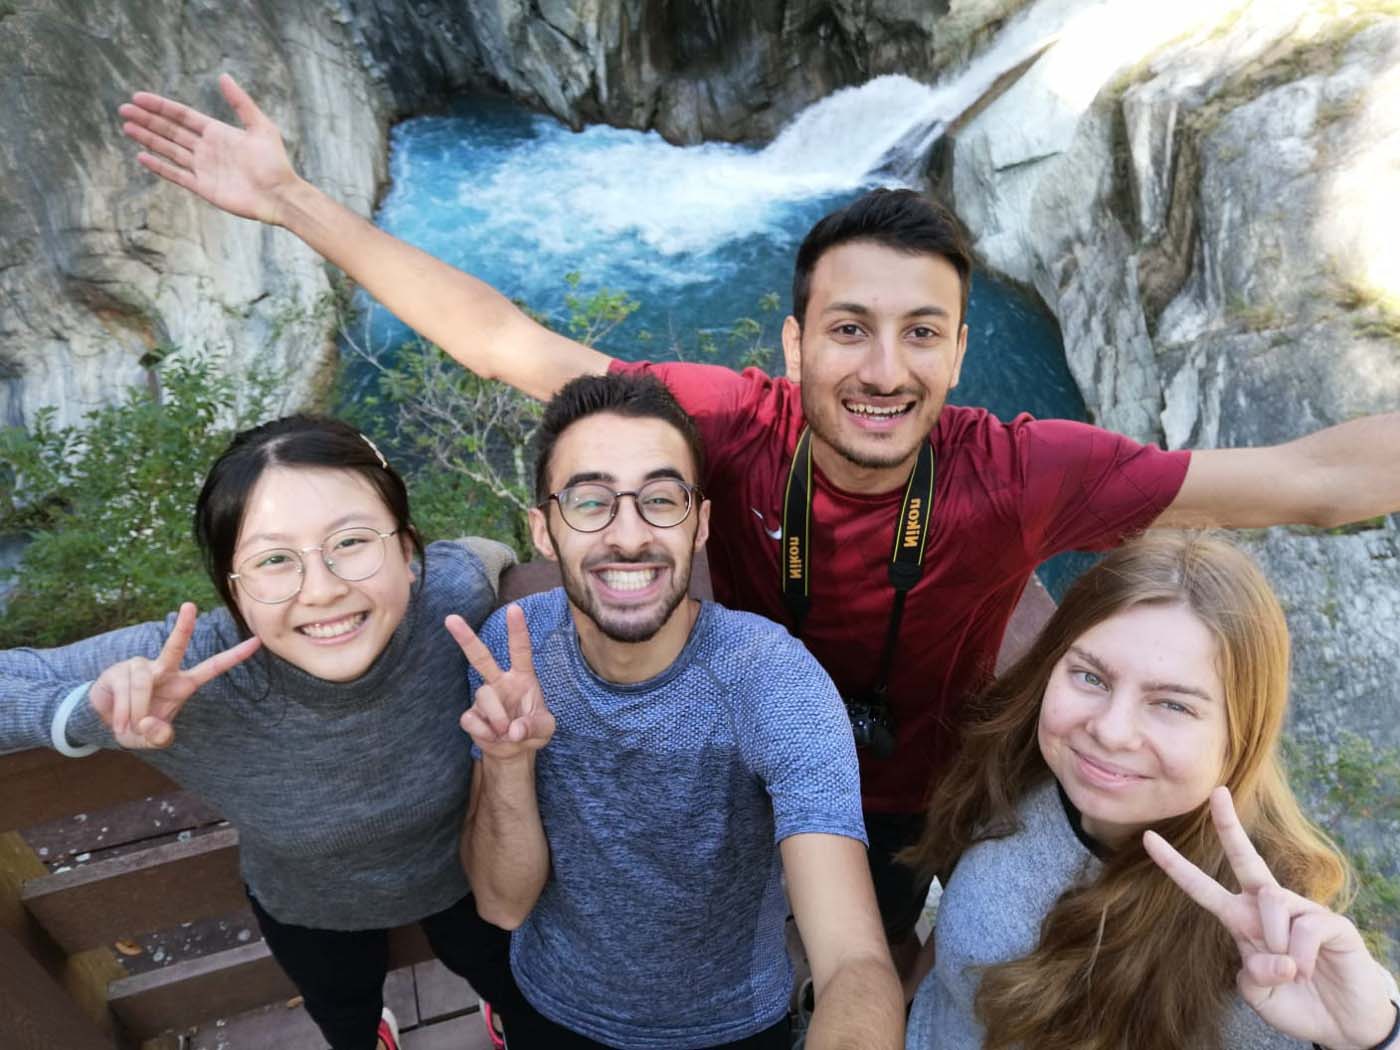 Simona and three friends in front of a waterfall.